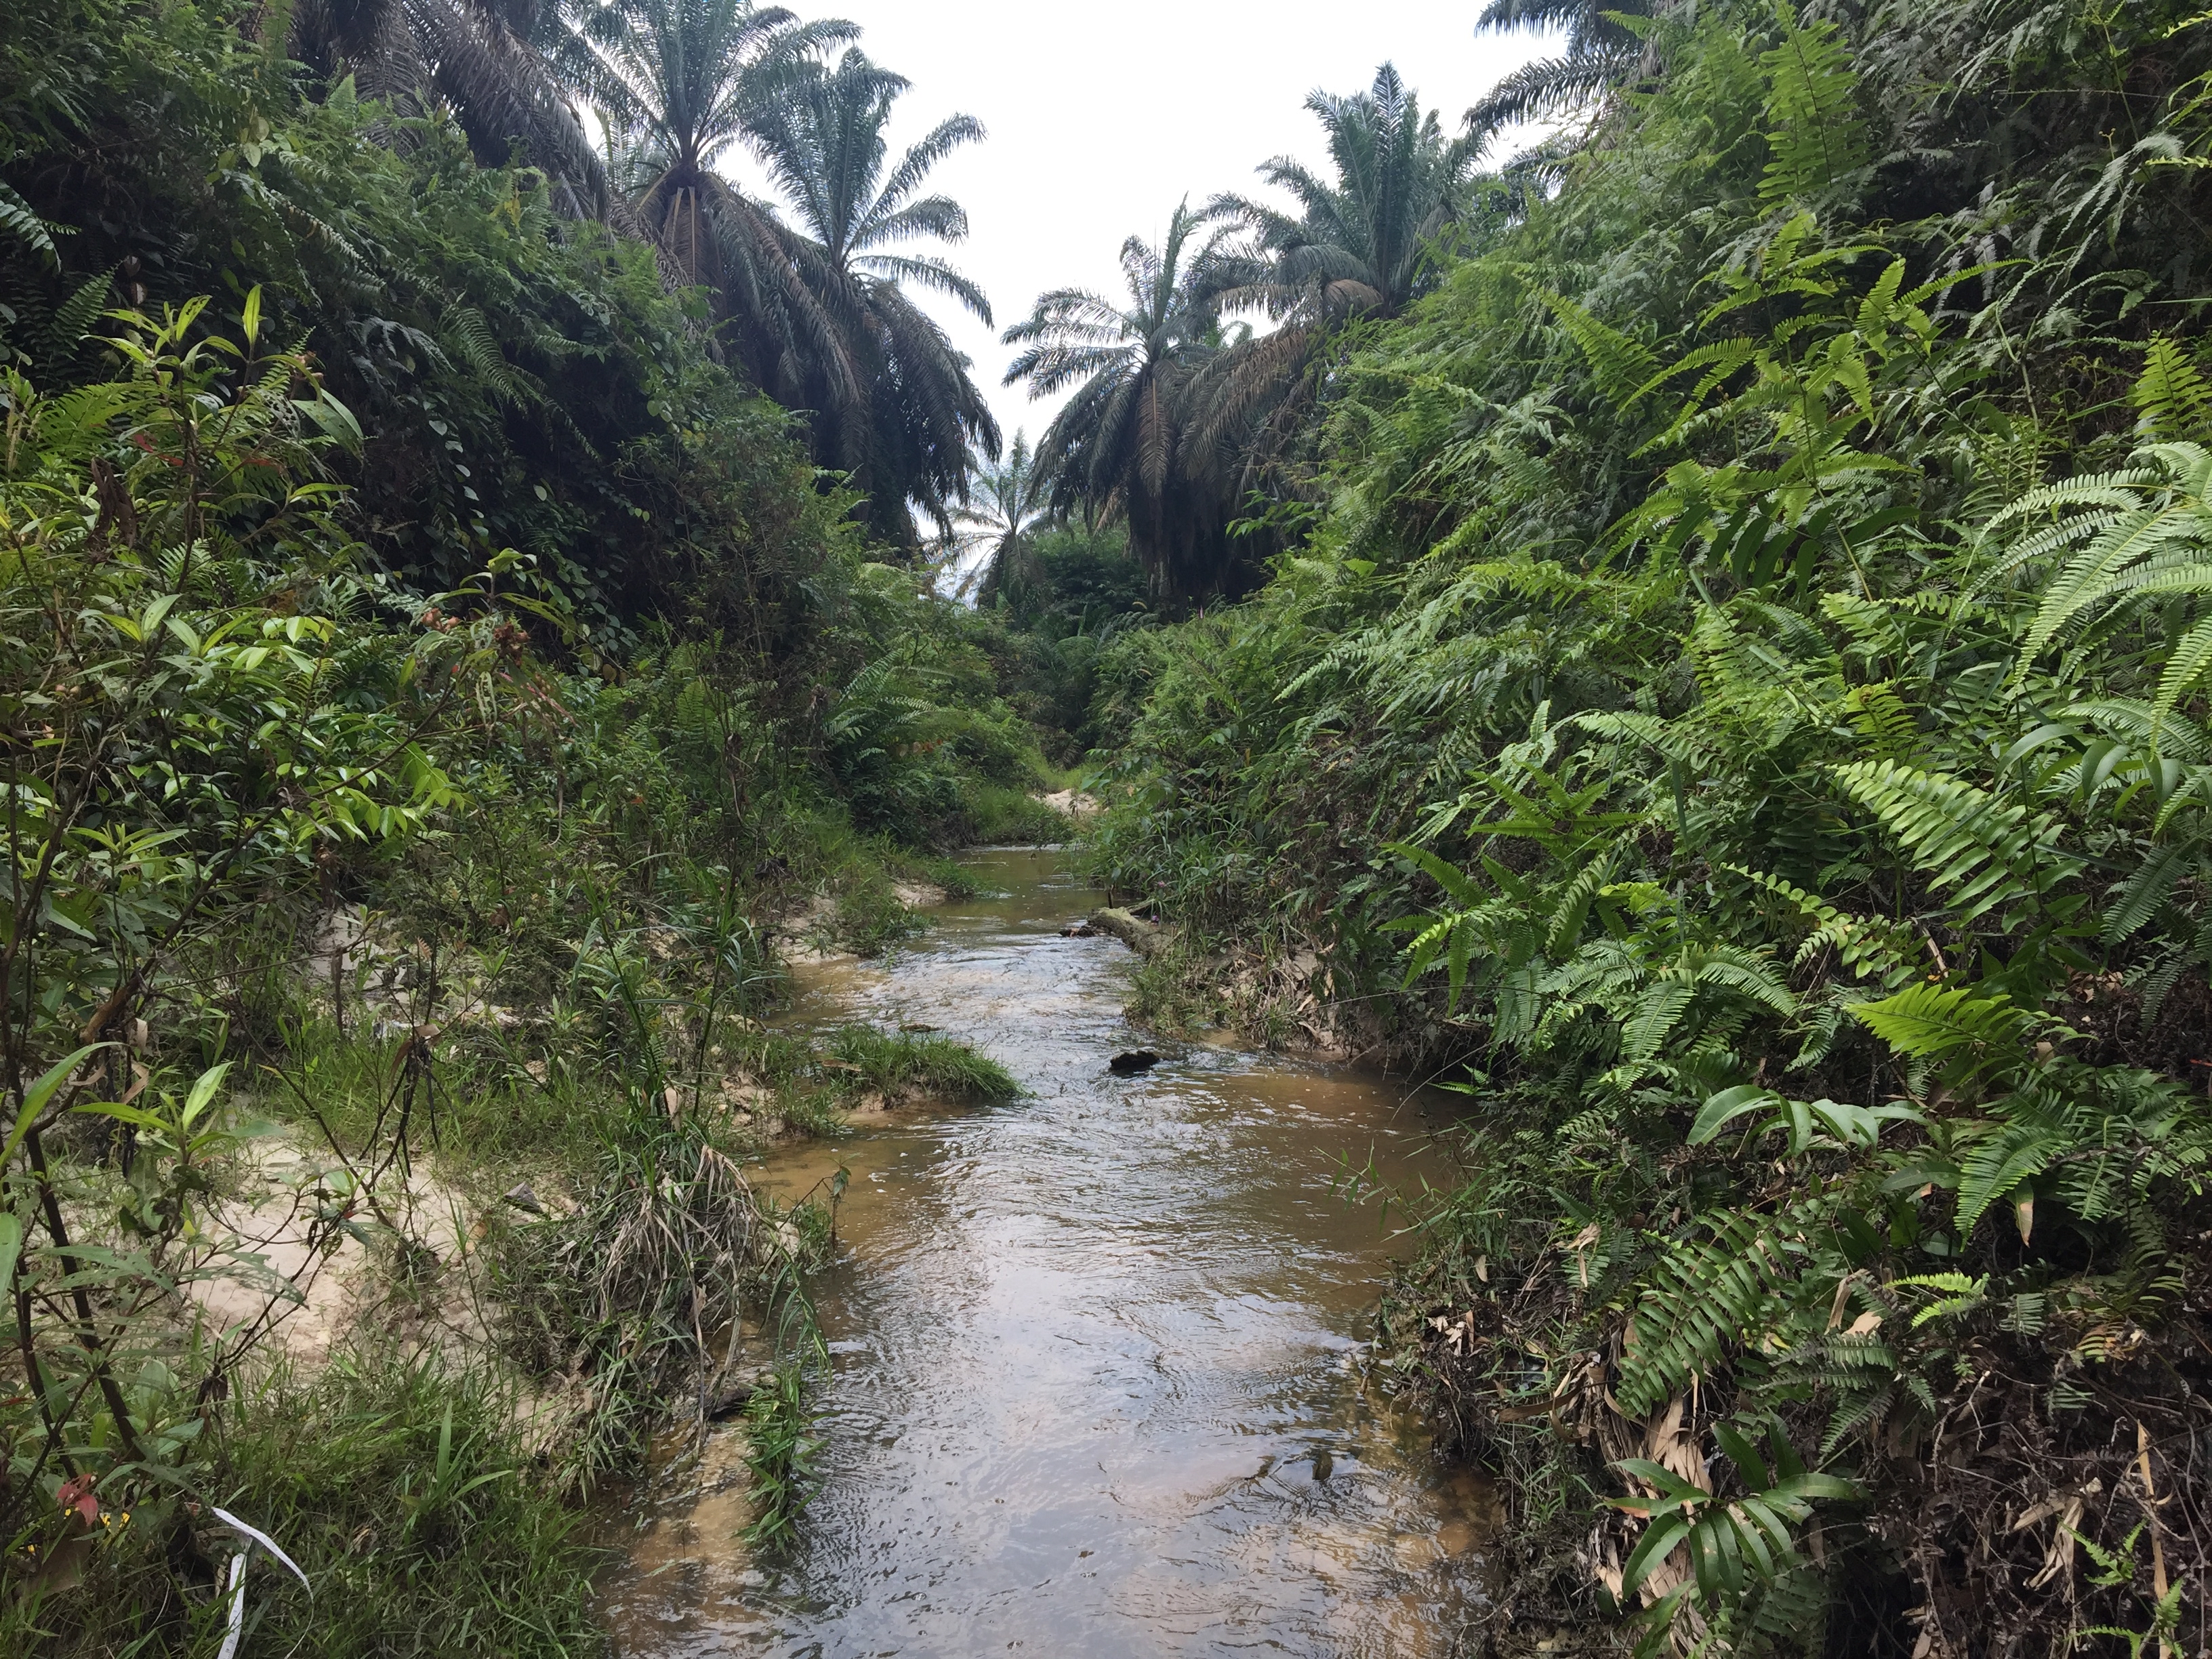 View of a mature palm buffer, taken from the river running through it.